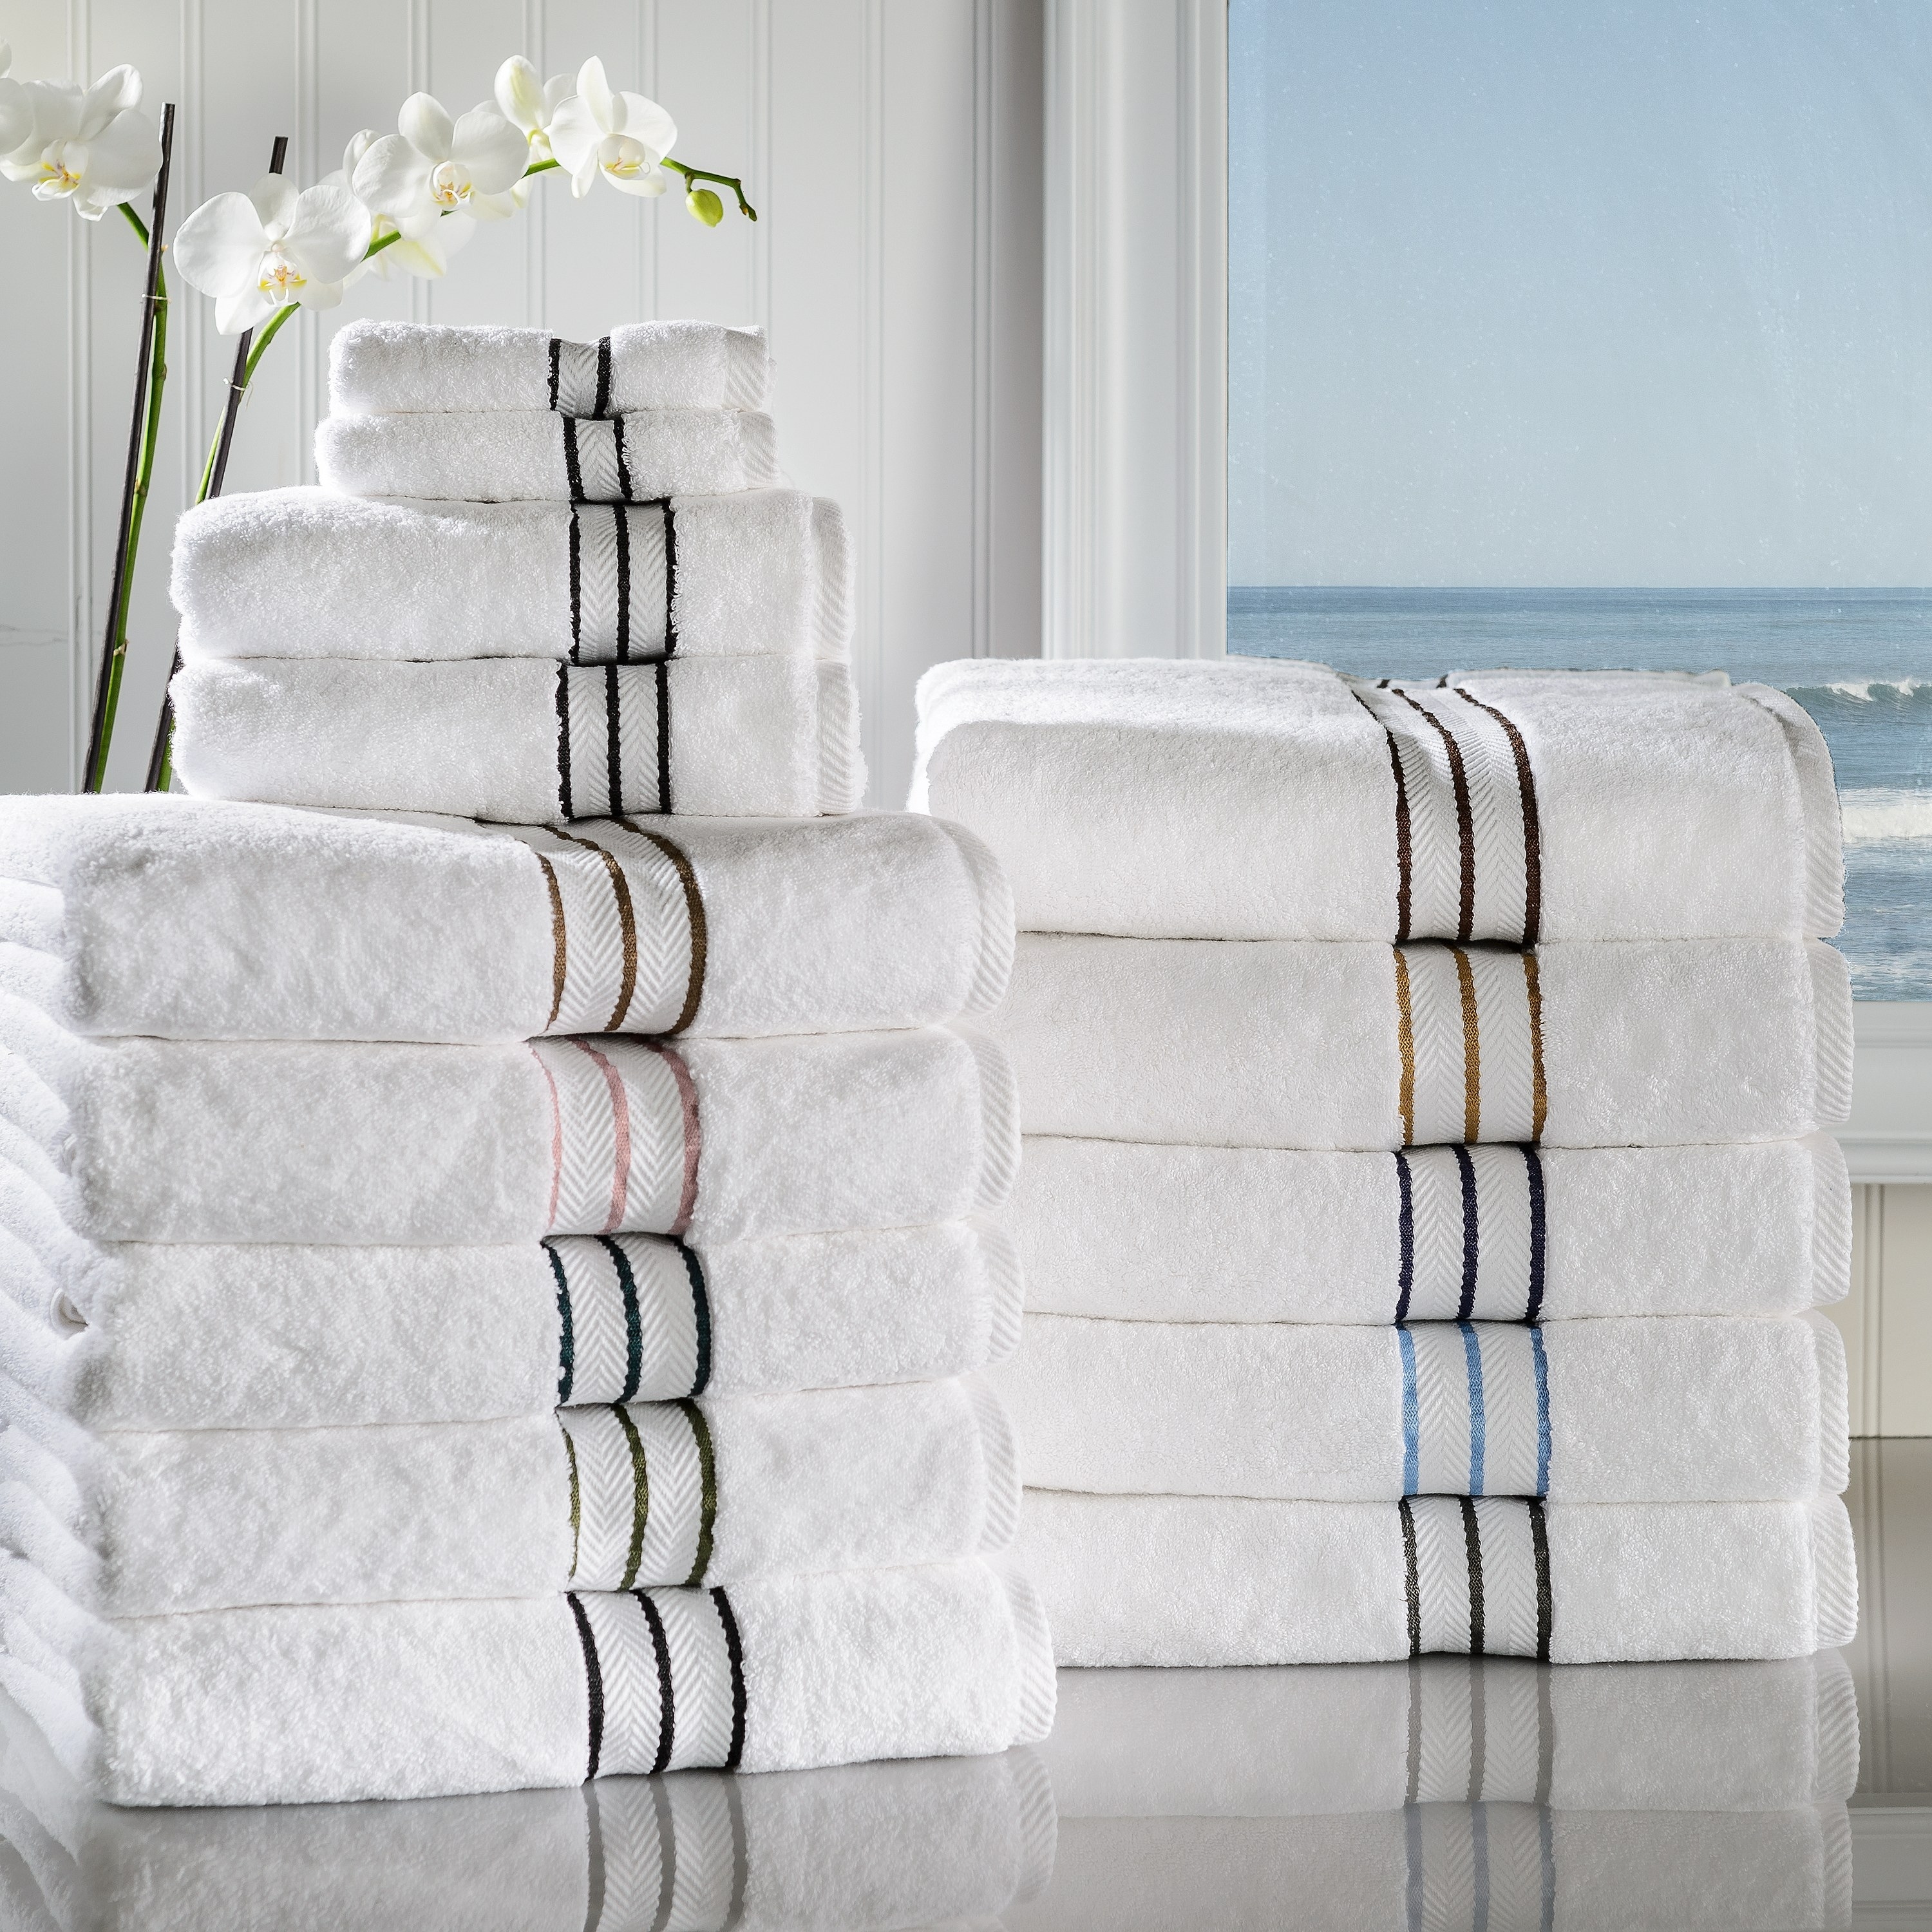 https://ak1.ostkcdn.com/images/products/is/images/direct/67cd6e296bf495b470760273598cdac16504beb8/Turkish-Cotton-6-Piece-Heavyweight-Hand-Towel-Set-by-Superior.jpg